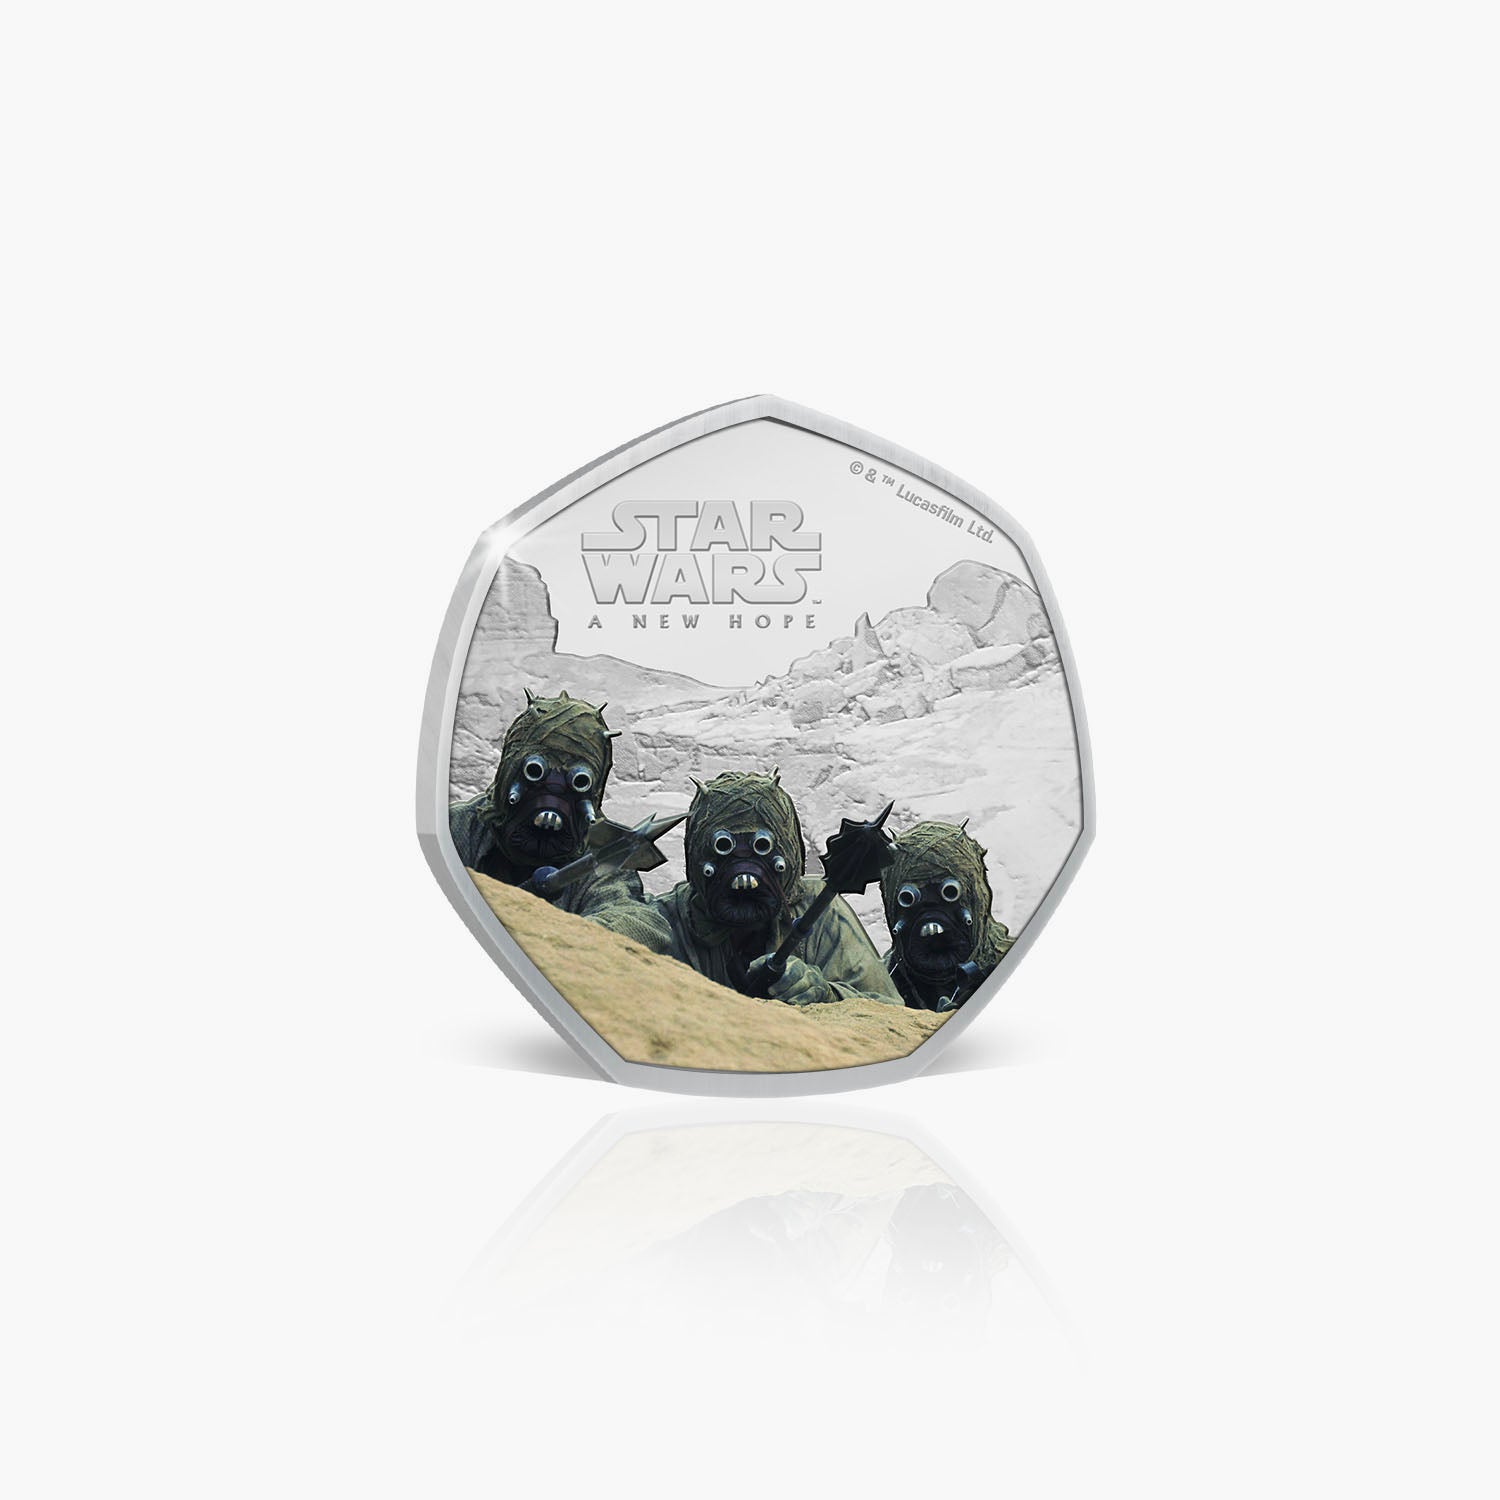 A New Hope - Tusken Raiders Silver Plated Coin